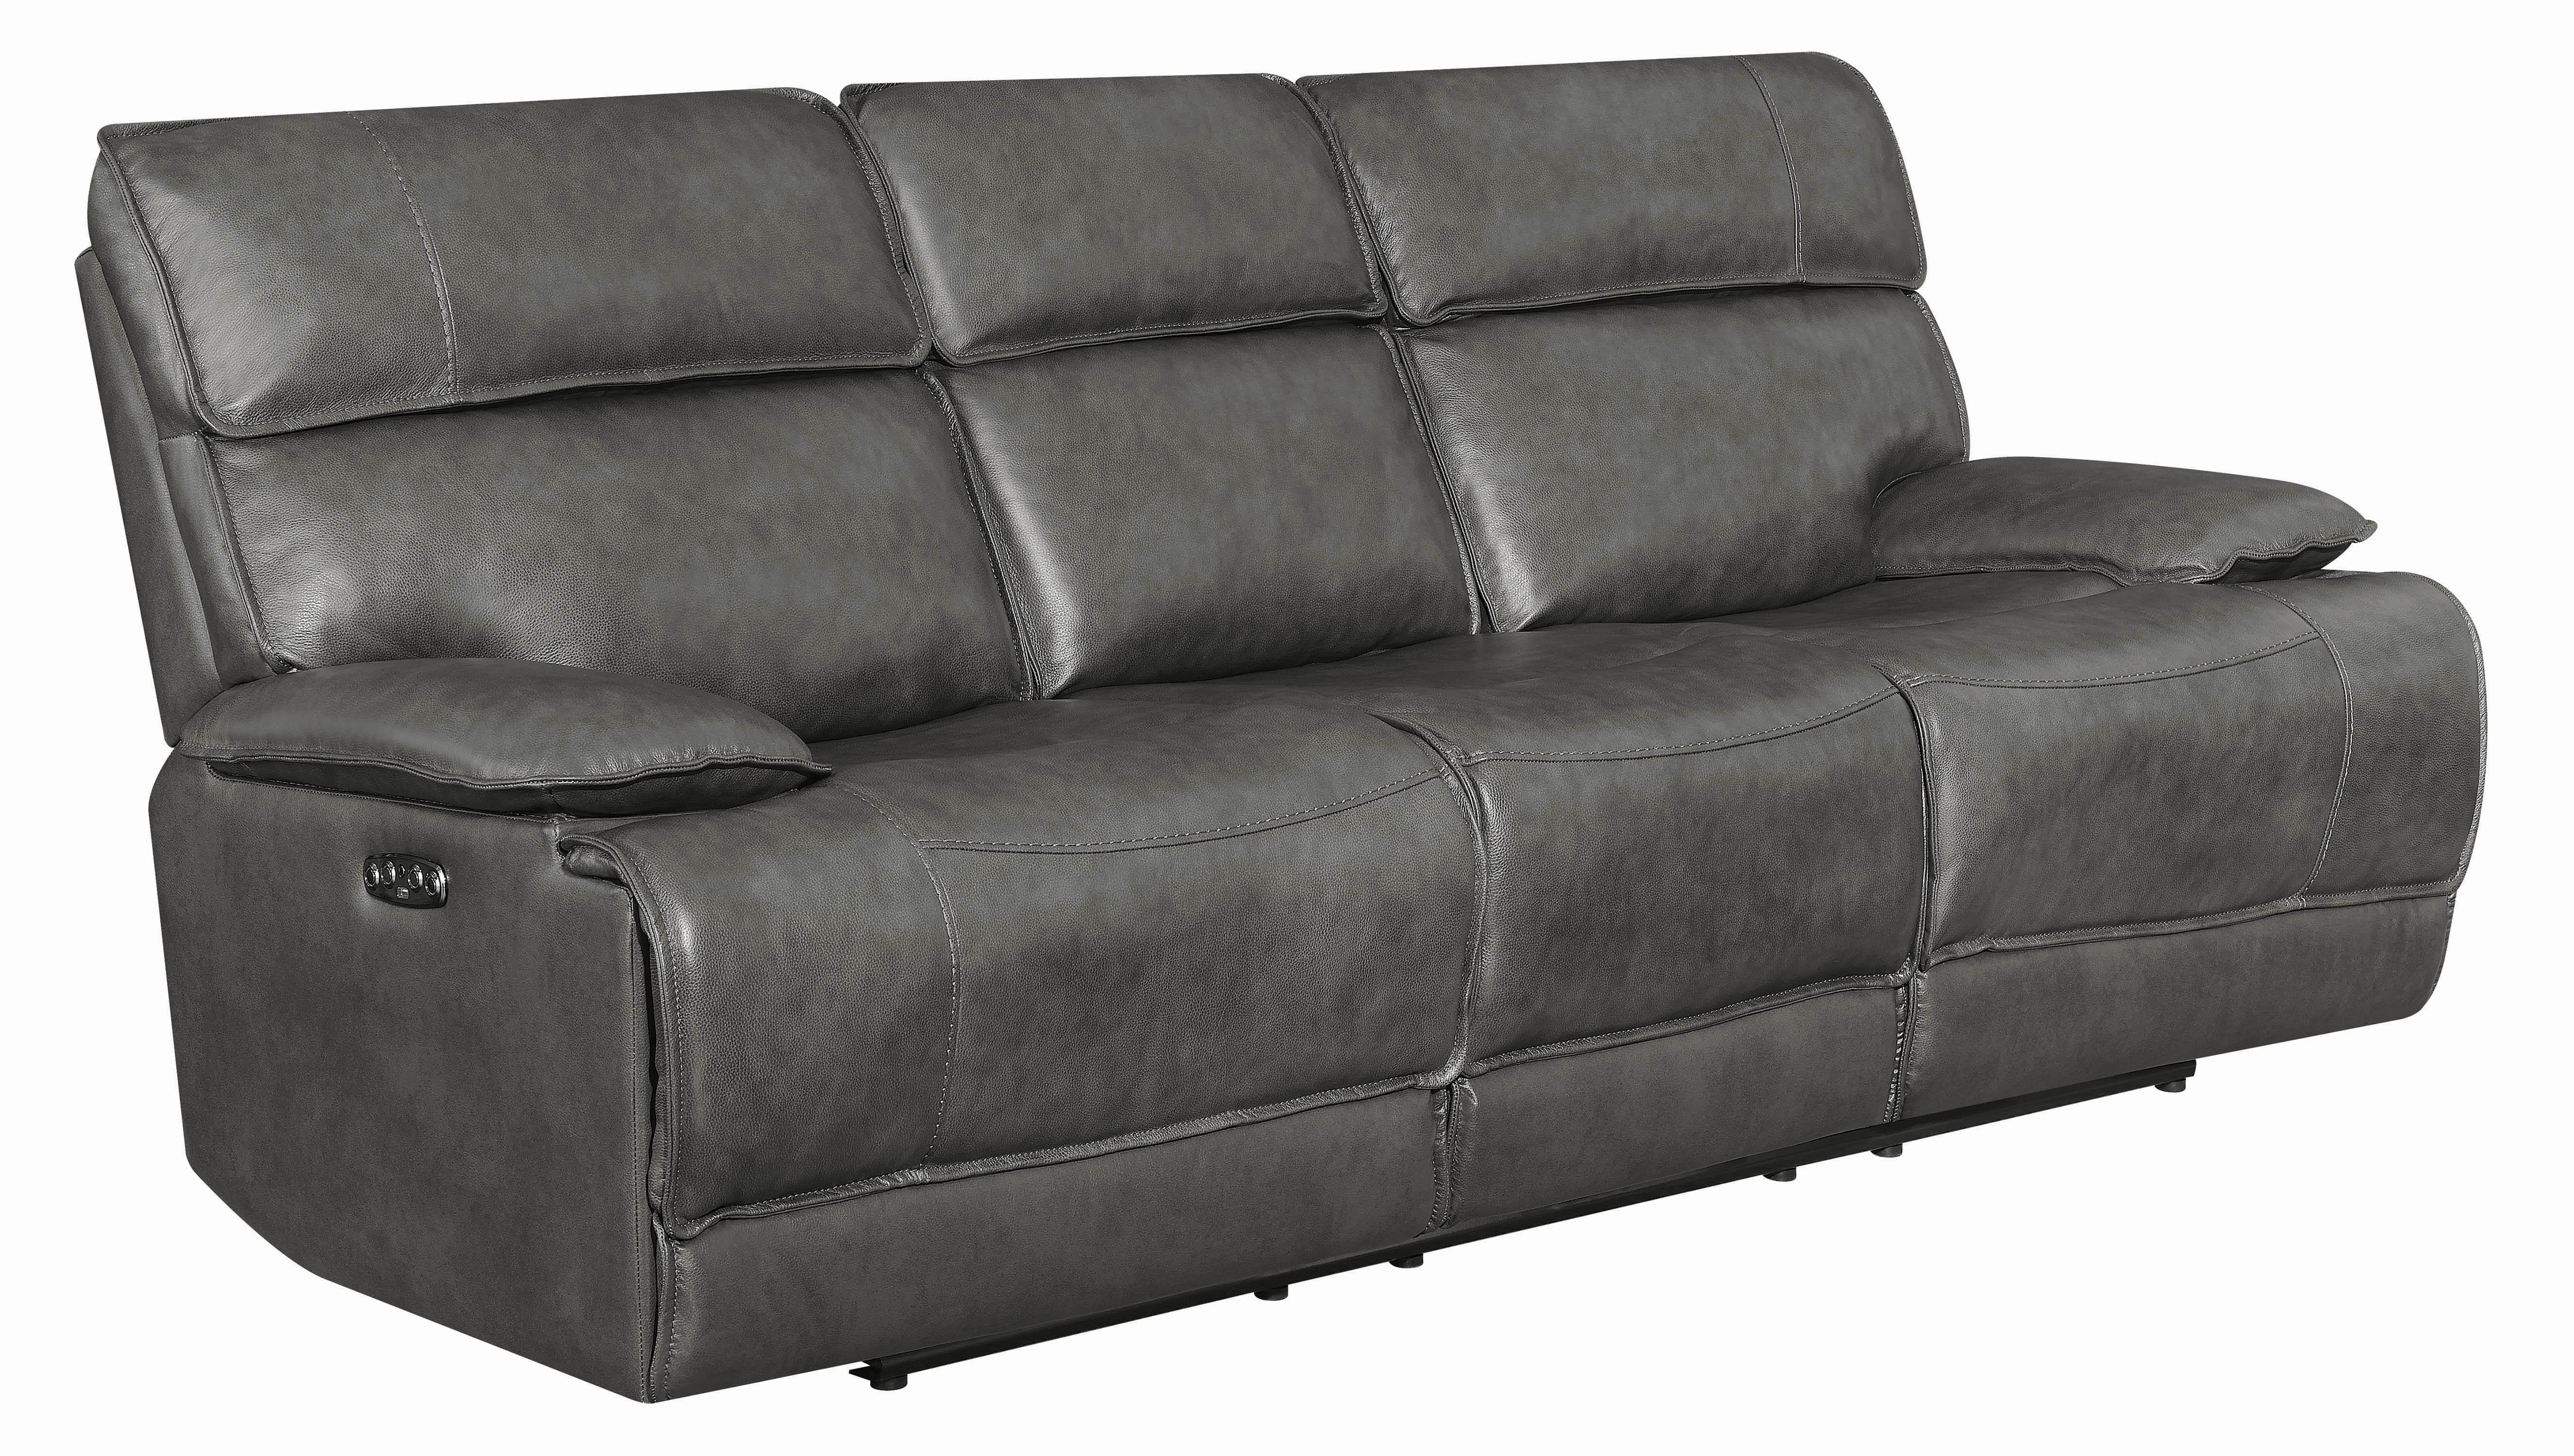 Modern Power2 sofa Stanford 650221PP in Gray Leather